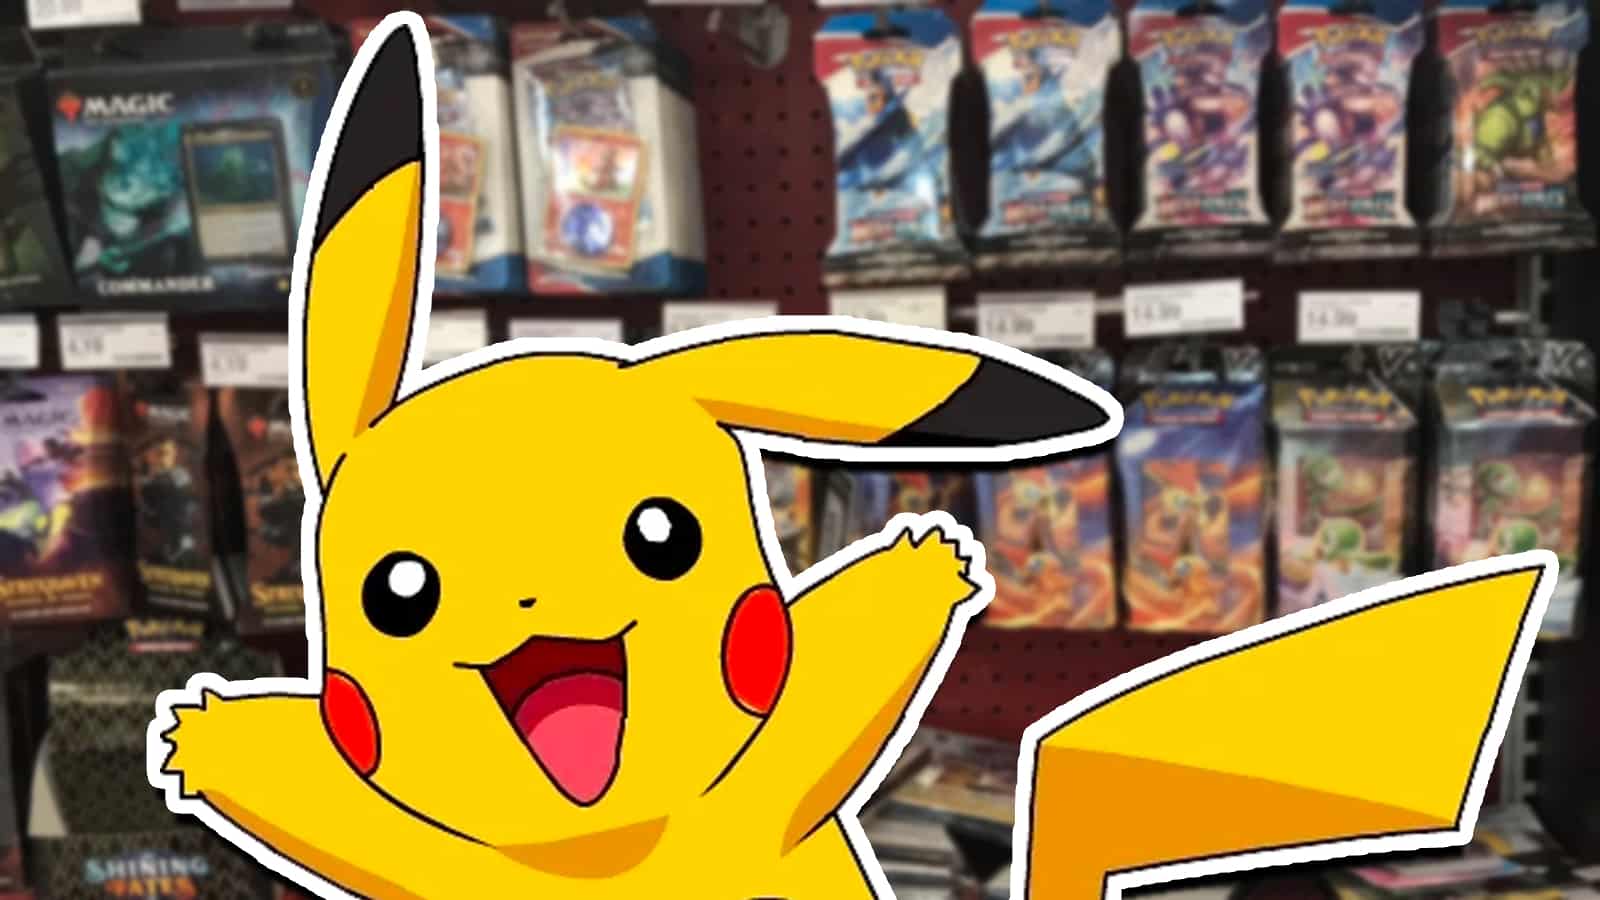 Smiling Pikachu in front of Target shelves